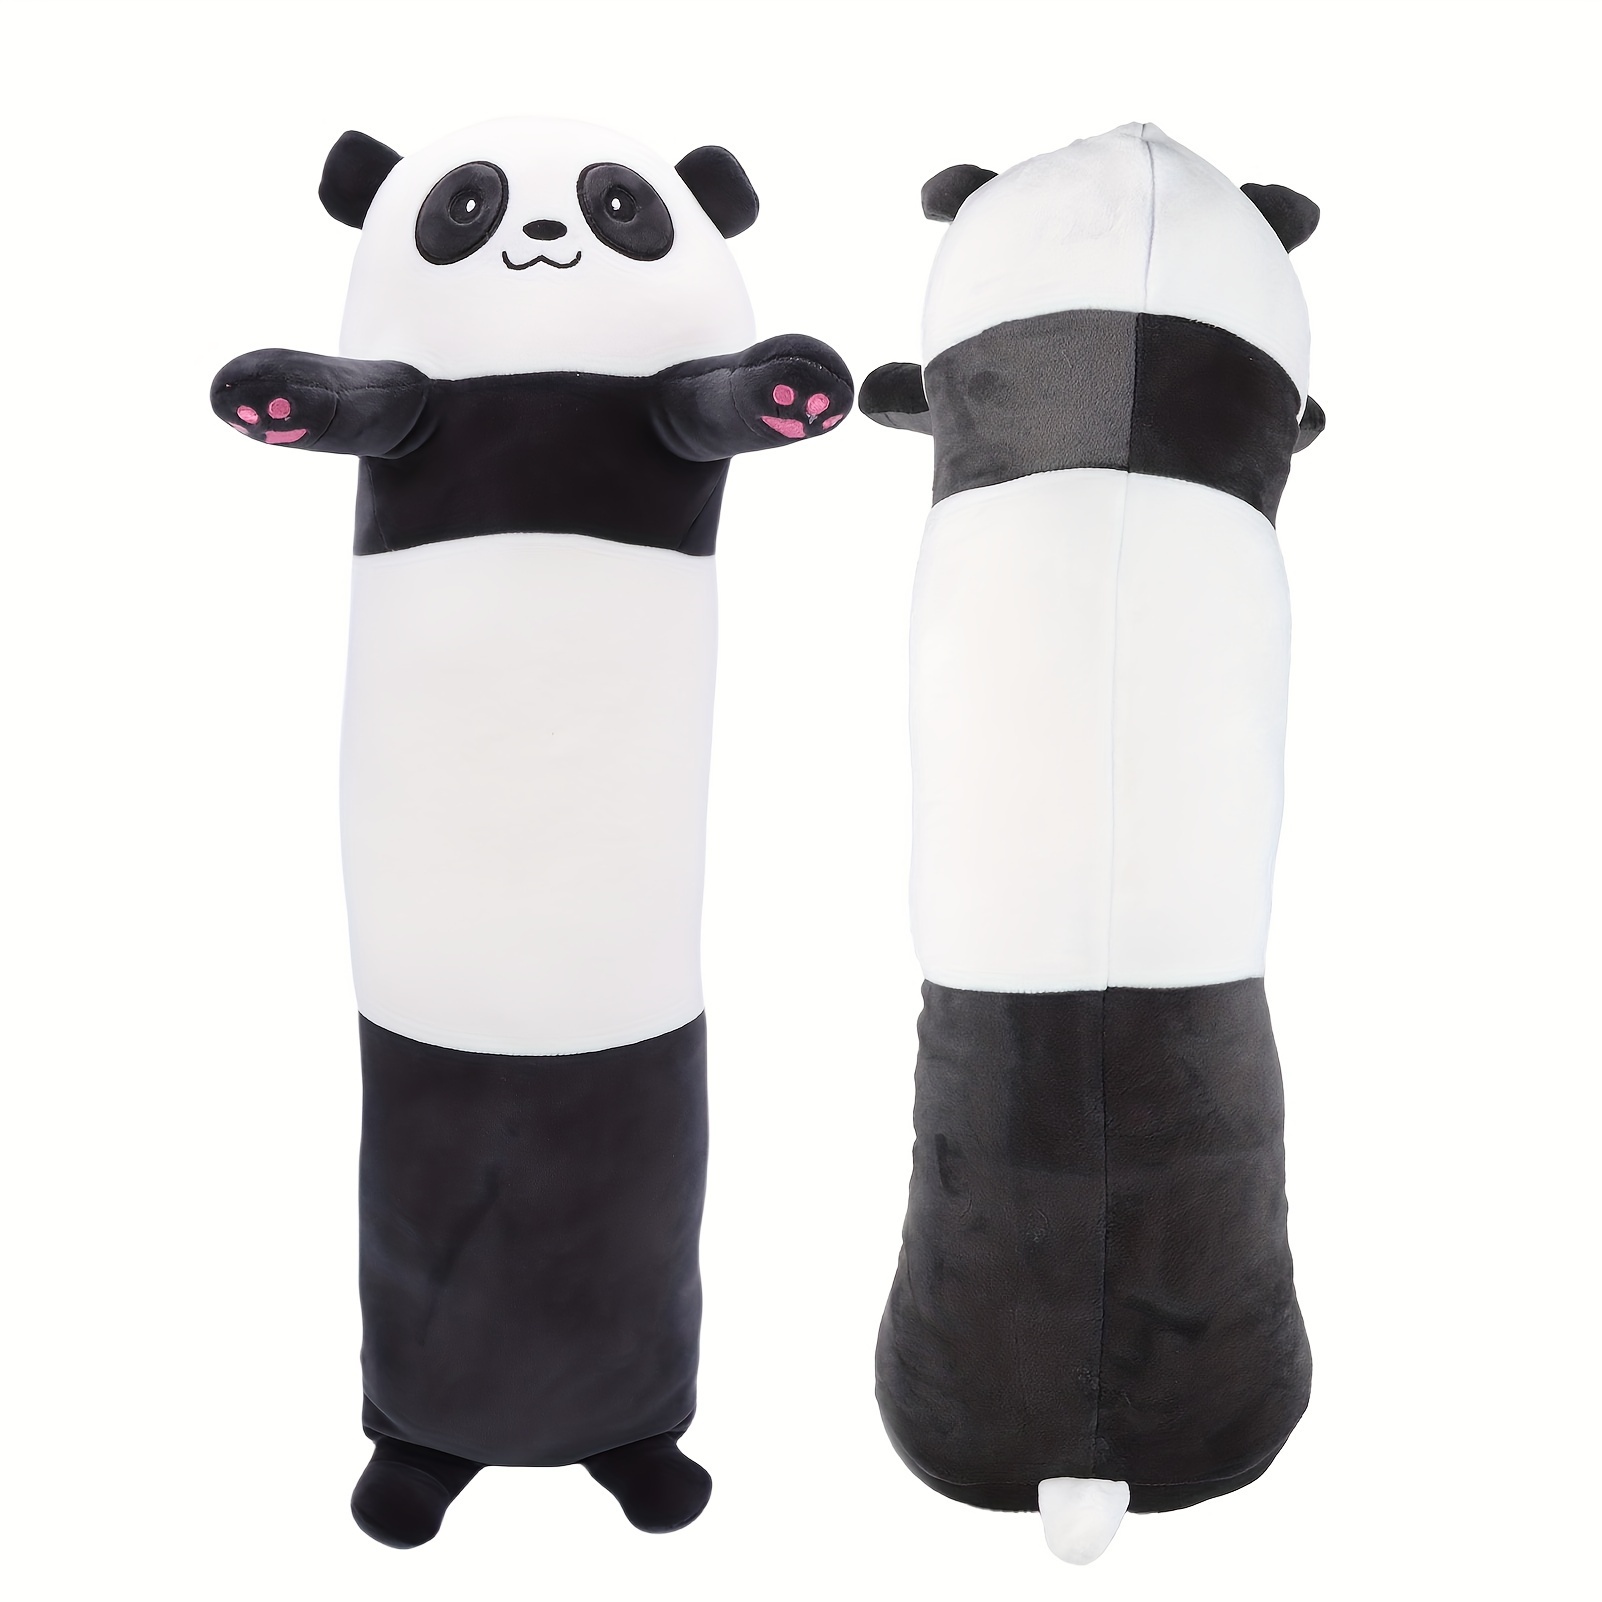 

Soft & Cuddly 24.8" Panda Plush Long Body Pillow - Perfect For Room Decor, Birthday Gifts & Snuggles, Ideal For Ages 0-3 Cuddly Pillow